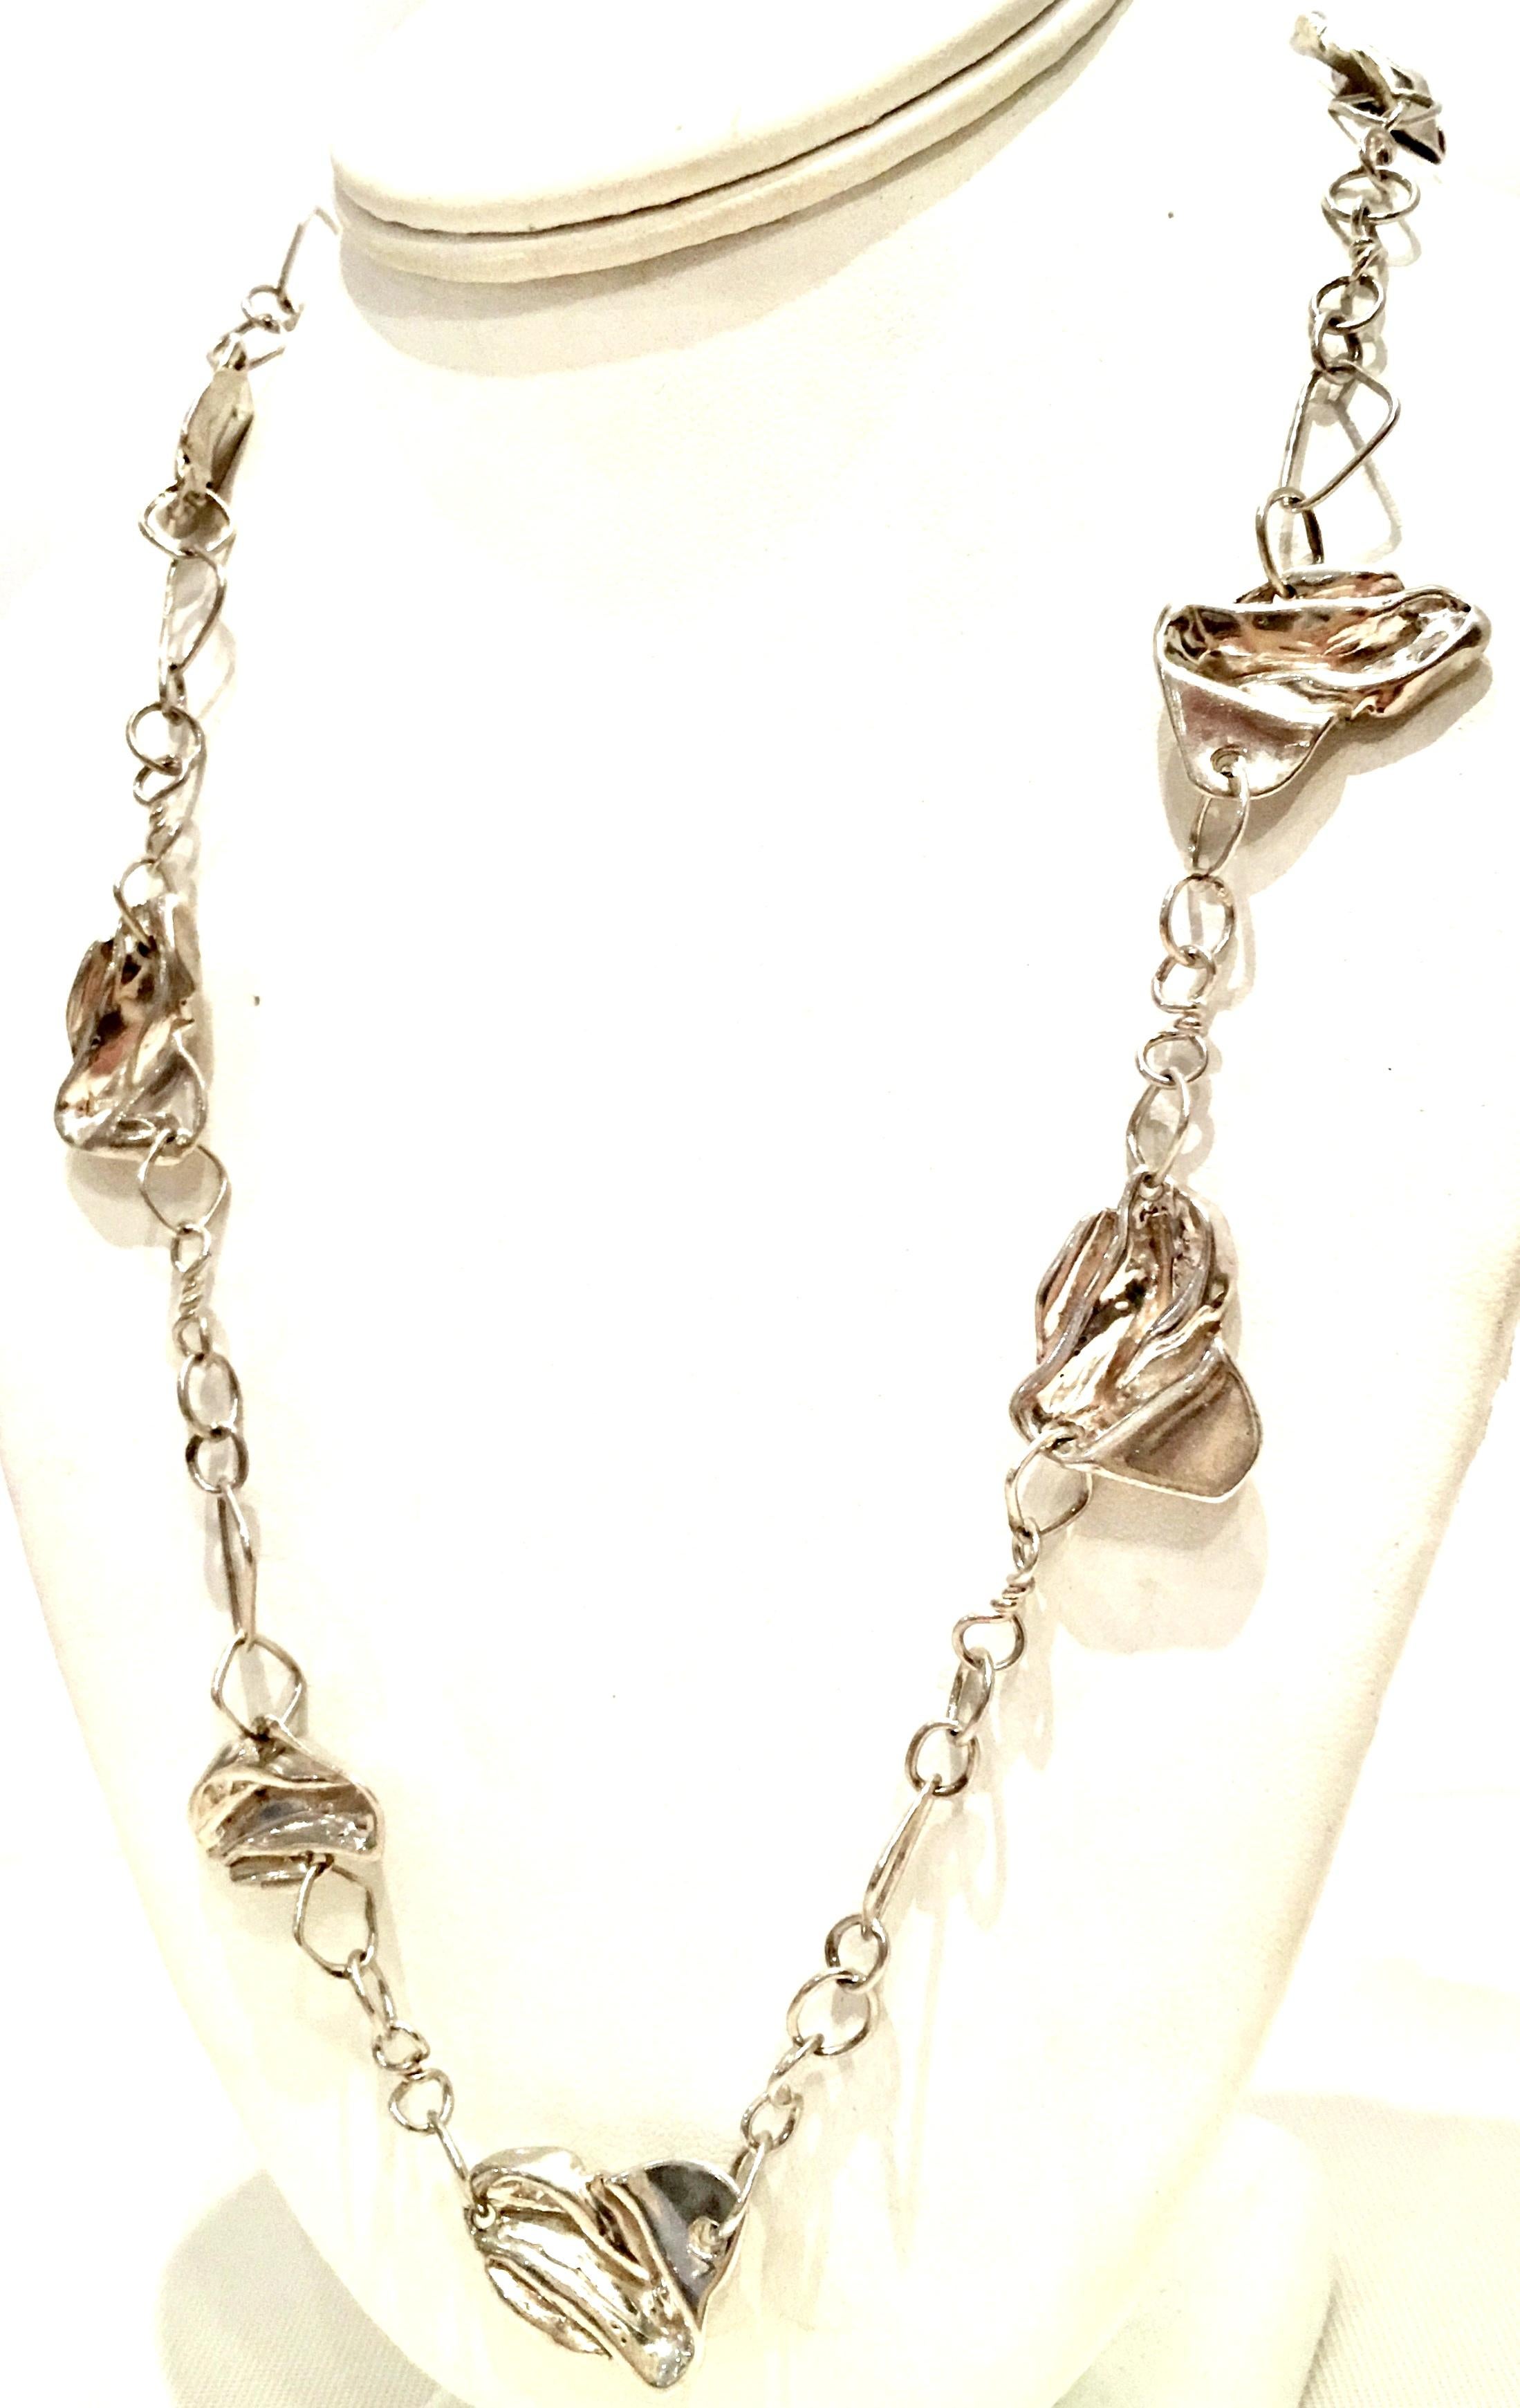 20th Century Sterling Silver Chain Link & Abstract Ornament Necklace. Features ten organic form dimensional ornaments on a chain link necklace. Each of the ten ornaments measure approximately 1